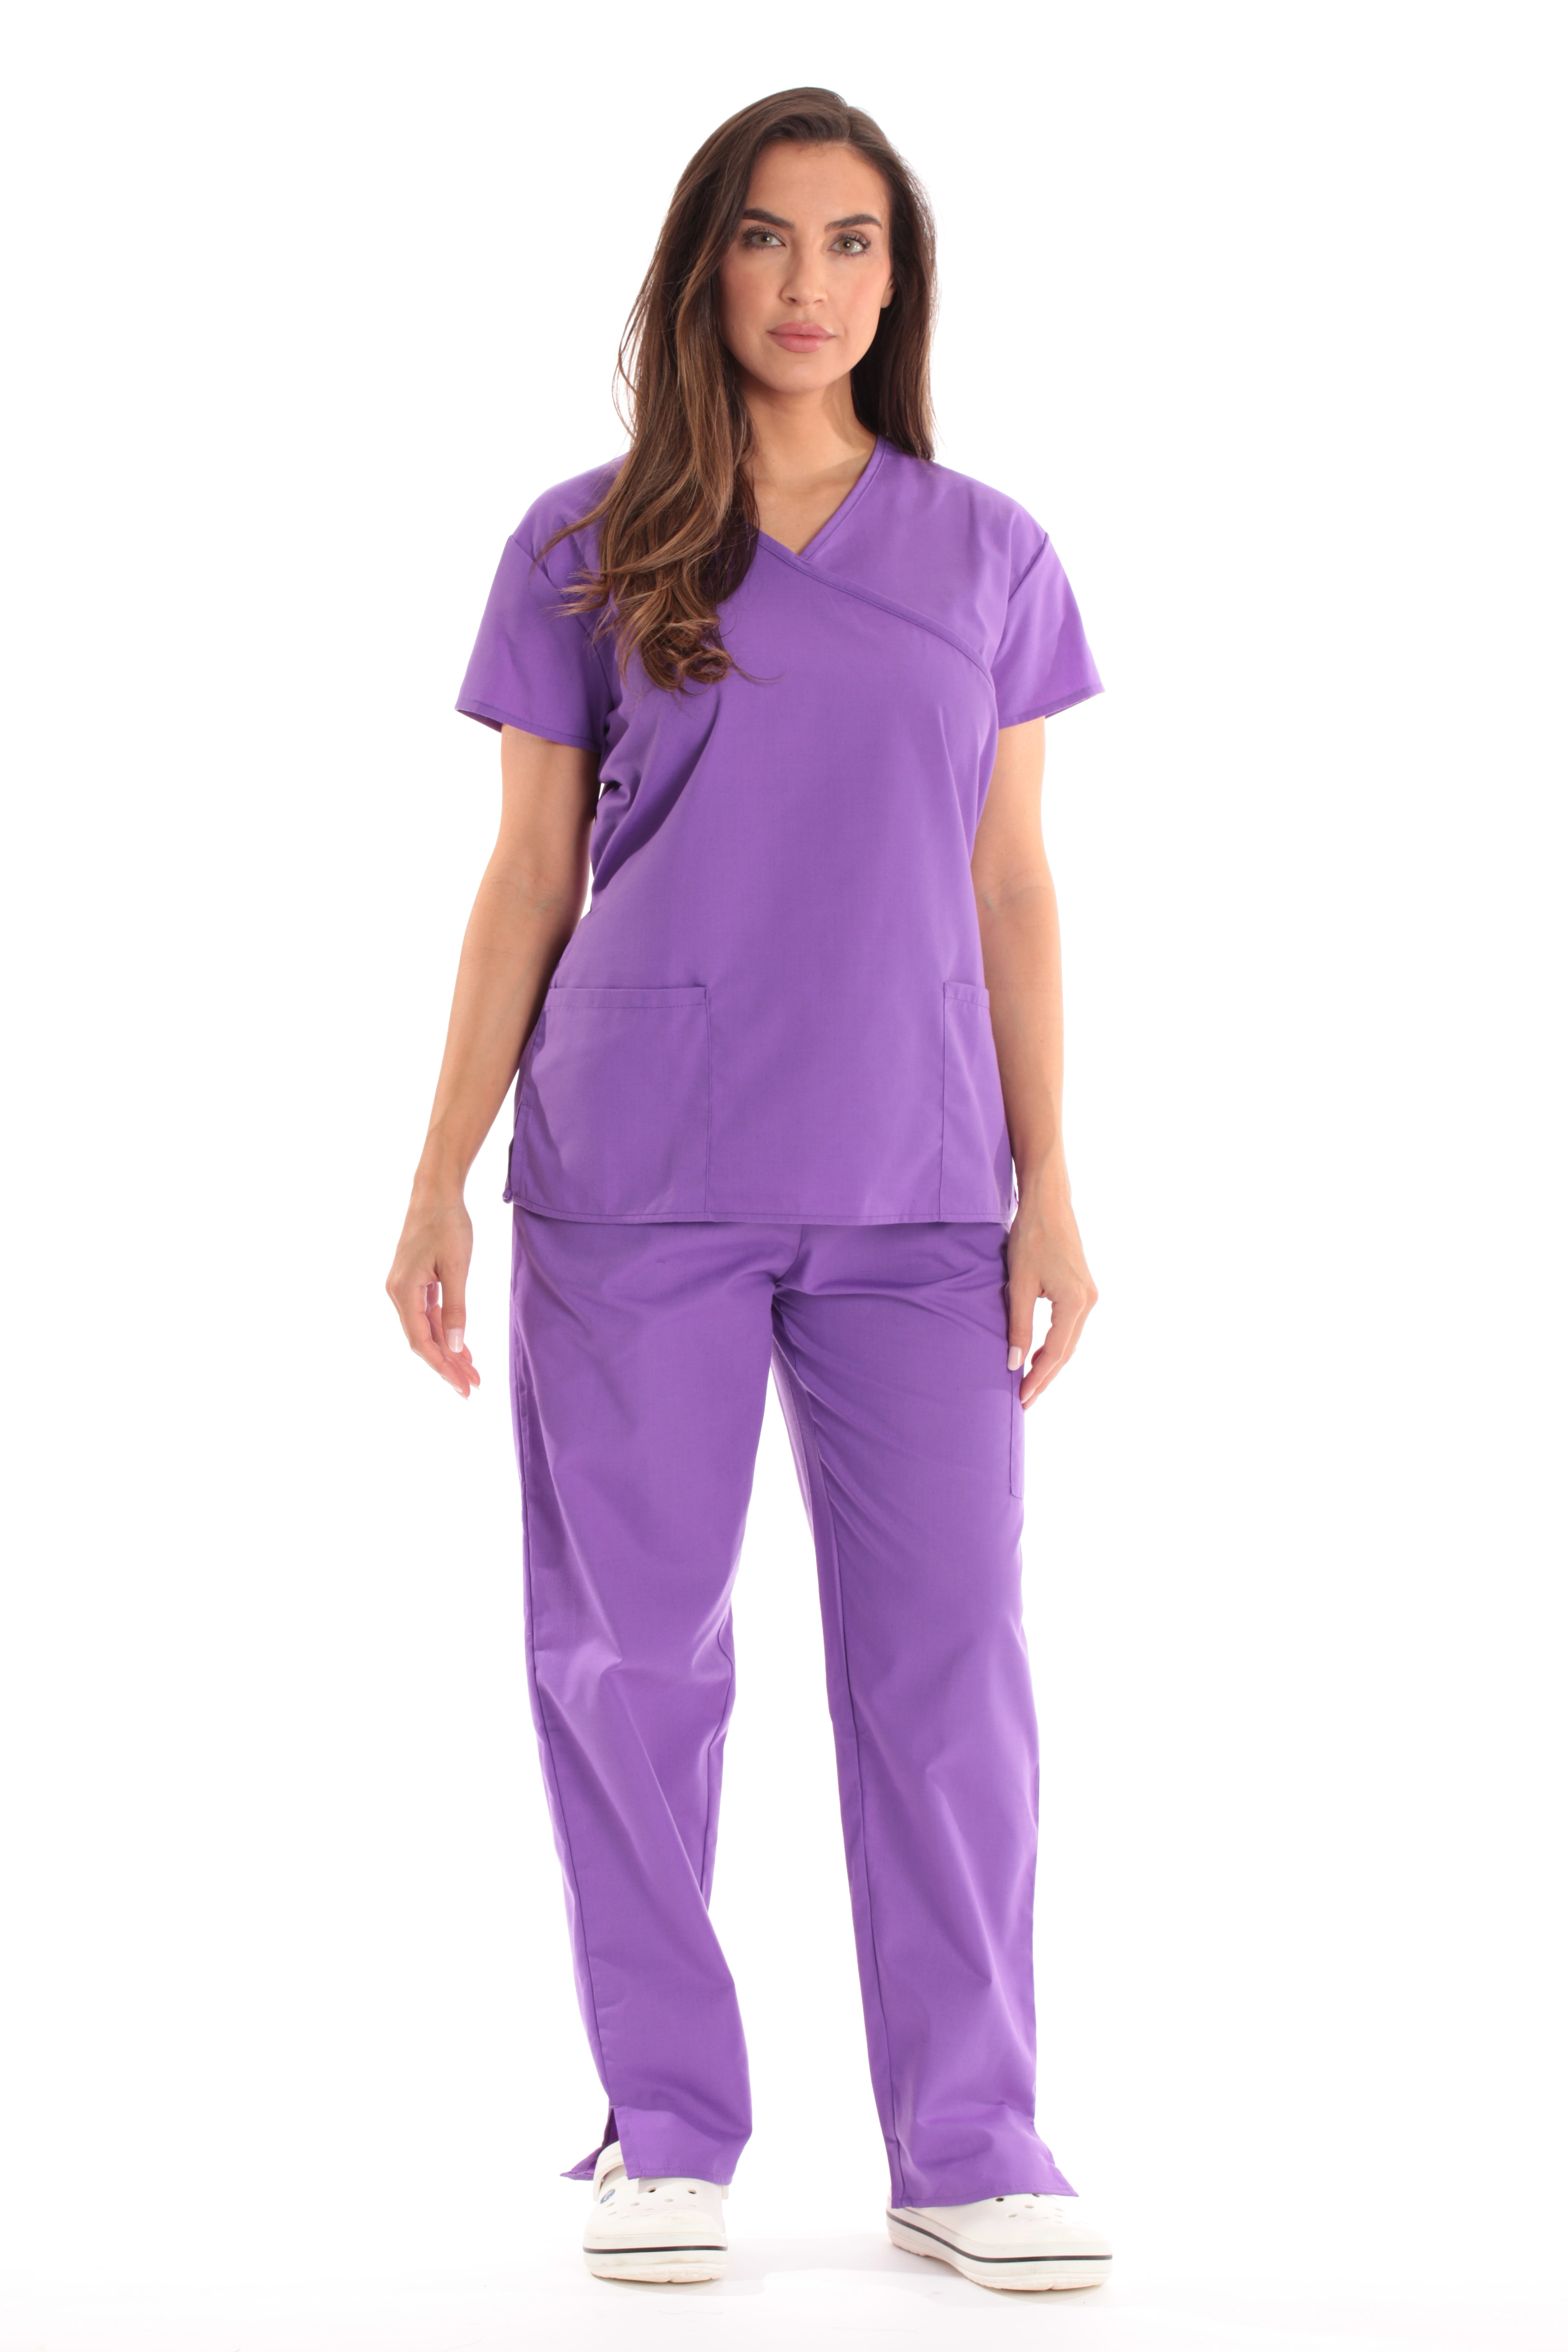 Just Love Women's Medical Scrub Sets - Mock Wrap Scrubs with